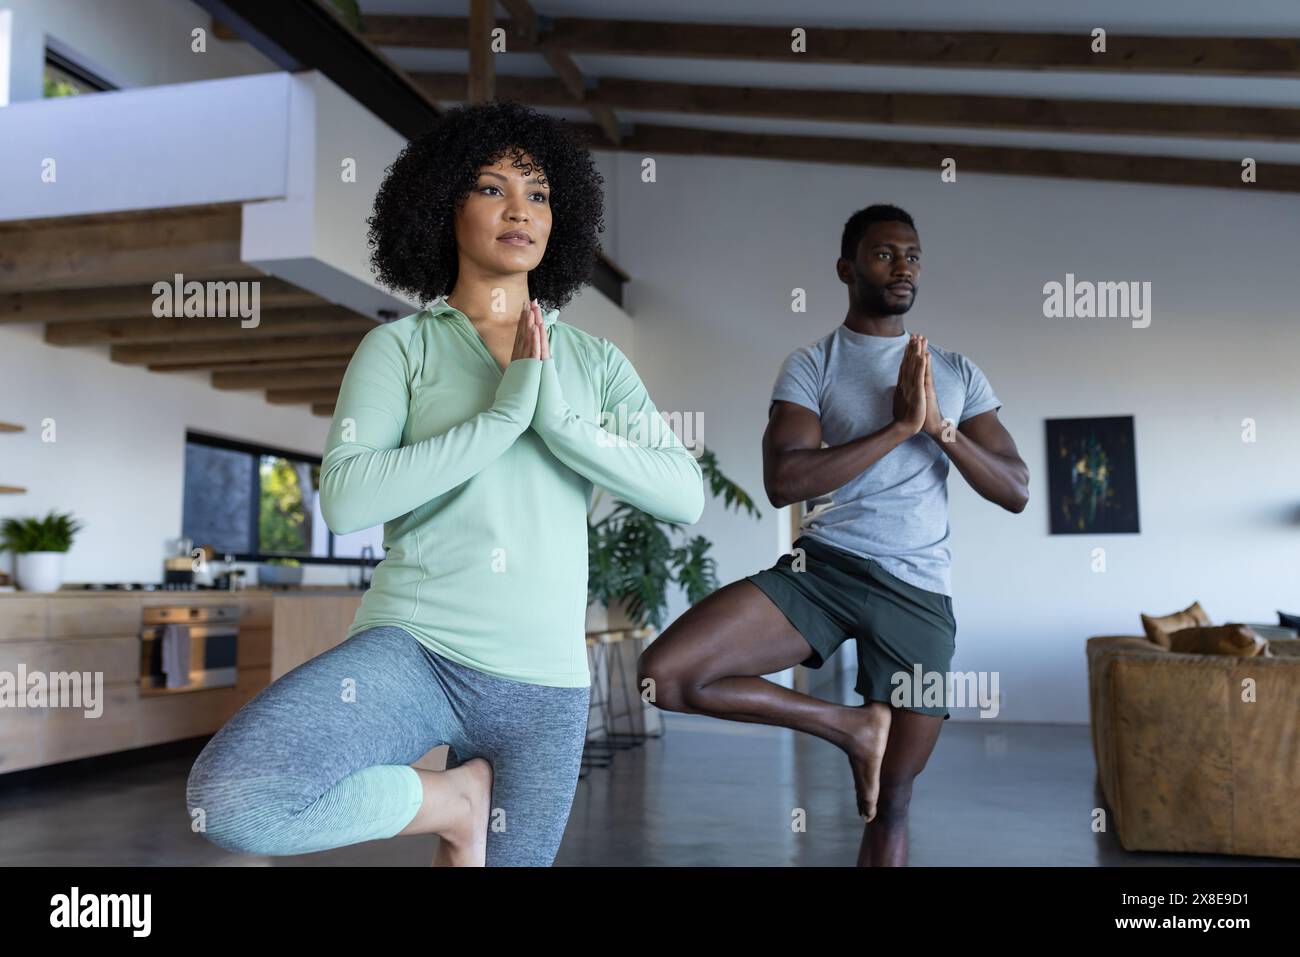 A diverse couple practicing yoga together at home Stock Photo